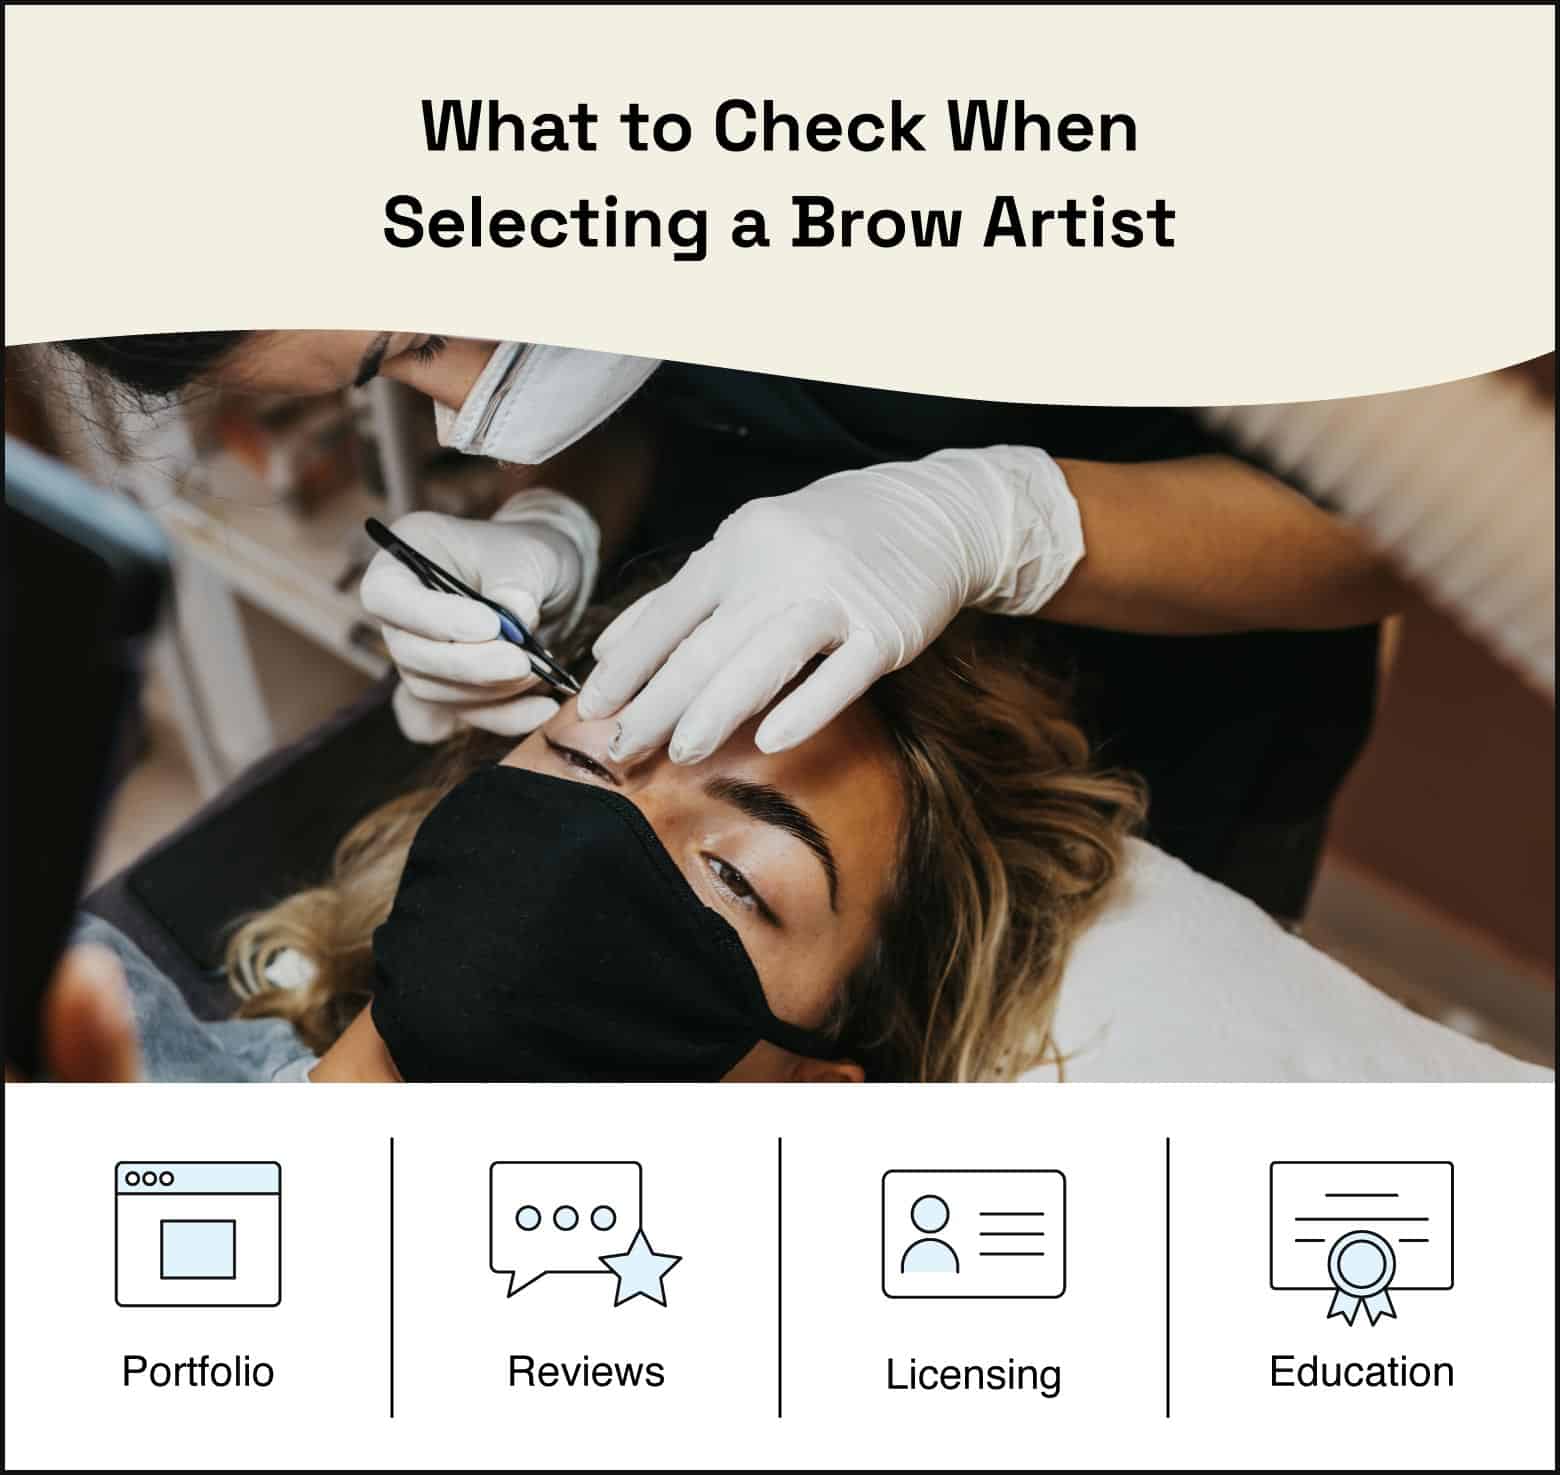 photo top showing brow artist working on client’s brows, illustrations on the bottom summarizing things to check when picking a brow artist